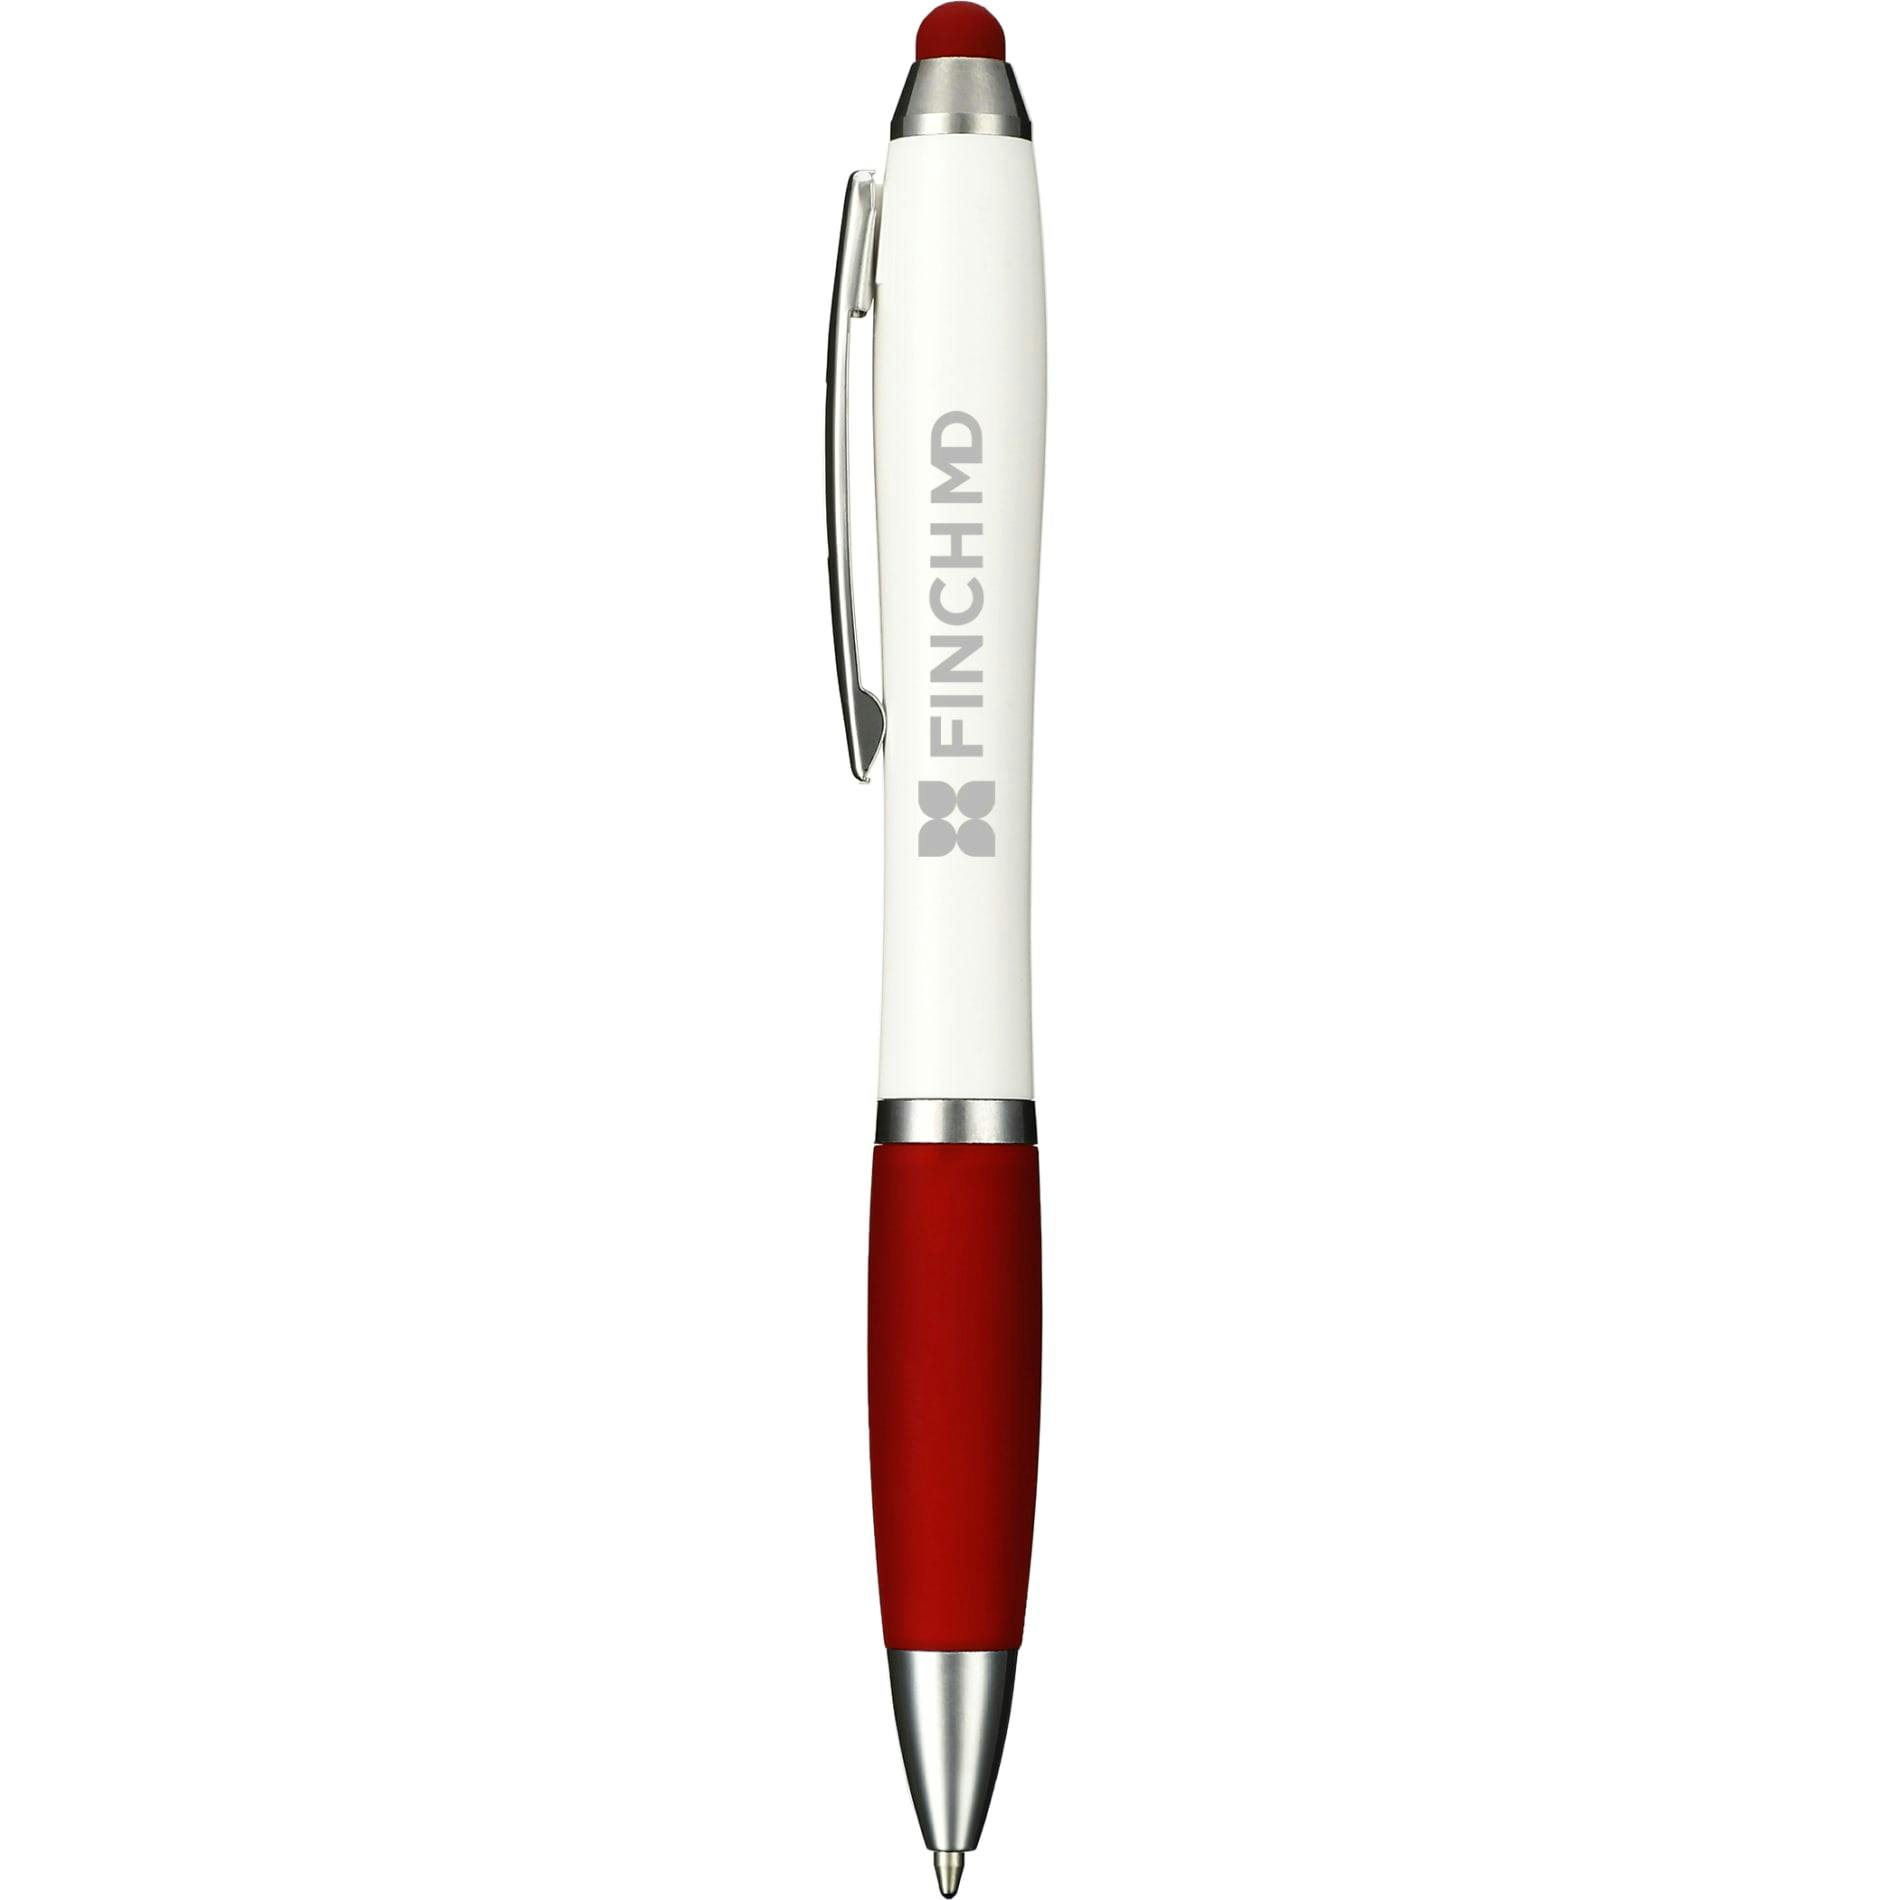 Nash Ballpoint Stylus with Antimicrobial Additive - additional Image 1